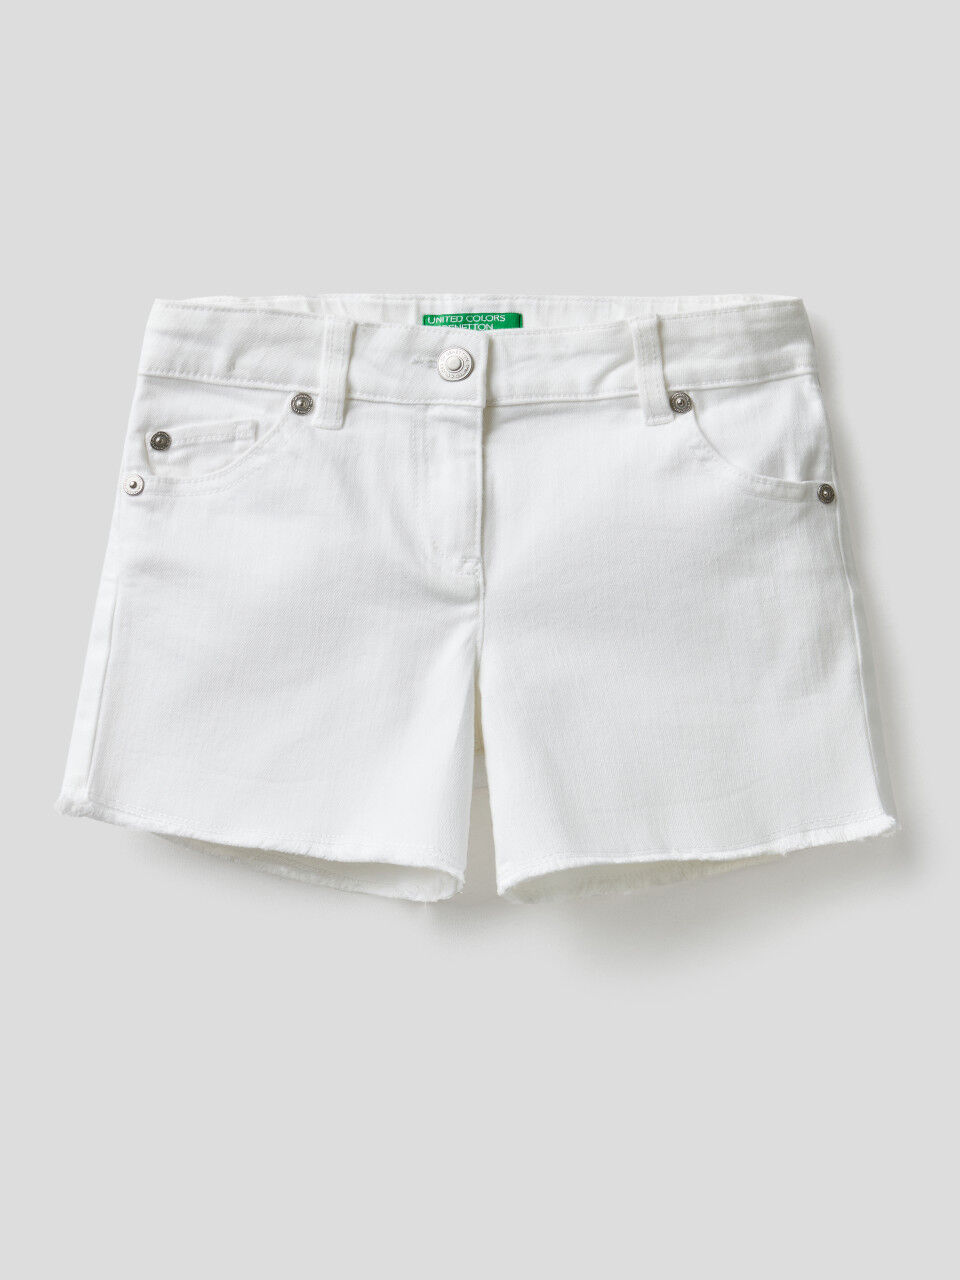 Shorts in stretch cotton blend